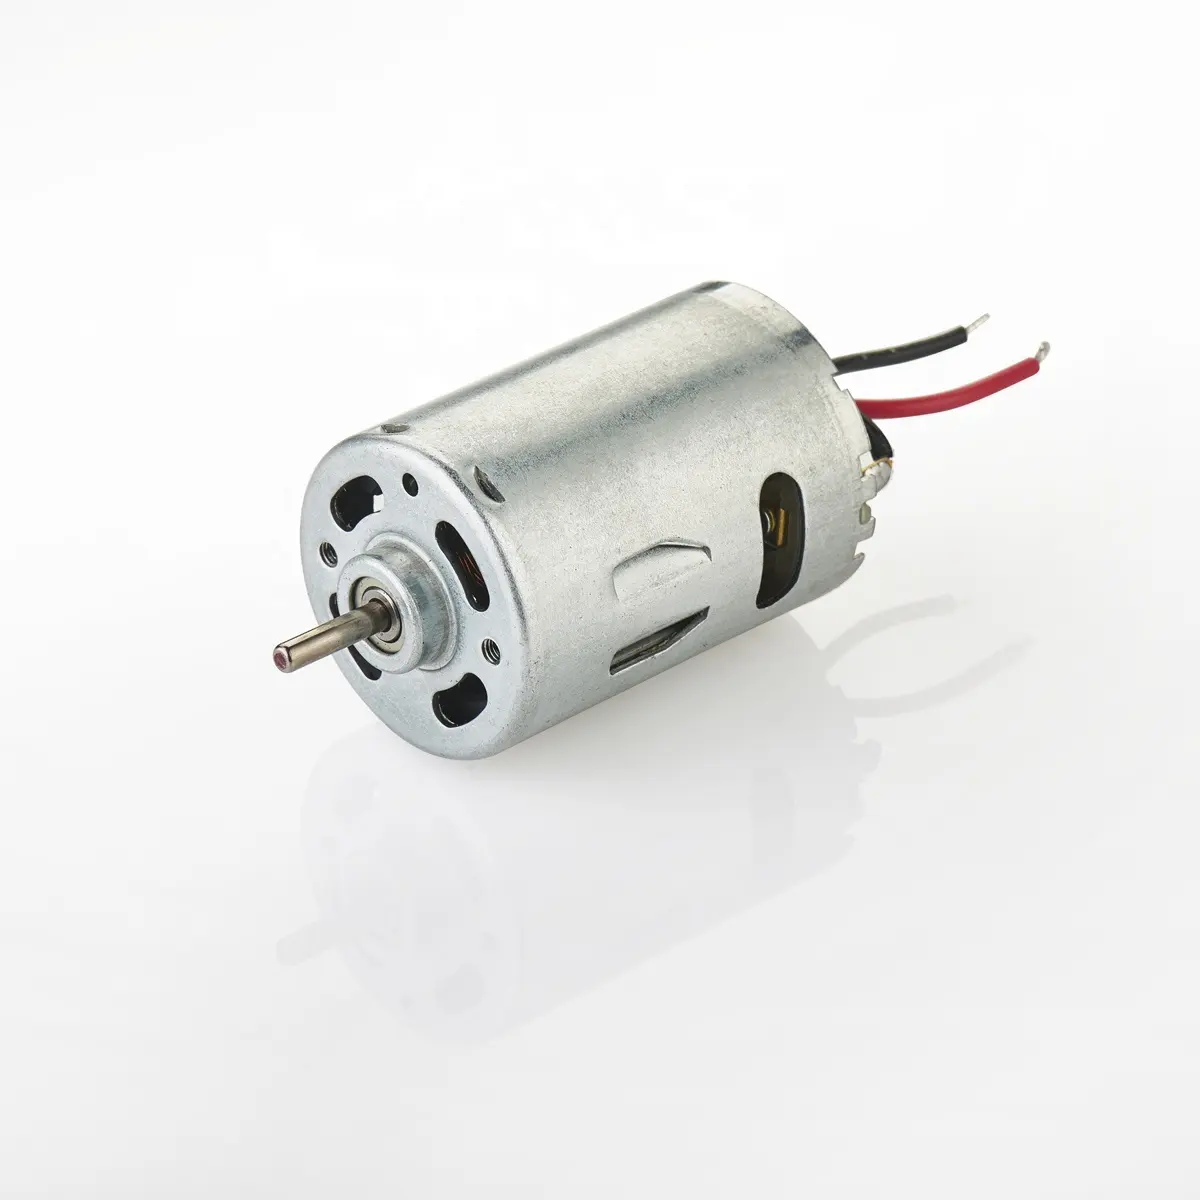 Mglory CE EMC RoHS 24000rpm RS545 Air pump dc motor 48 volt for electric lawn mower motor